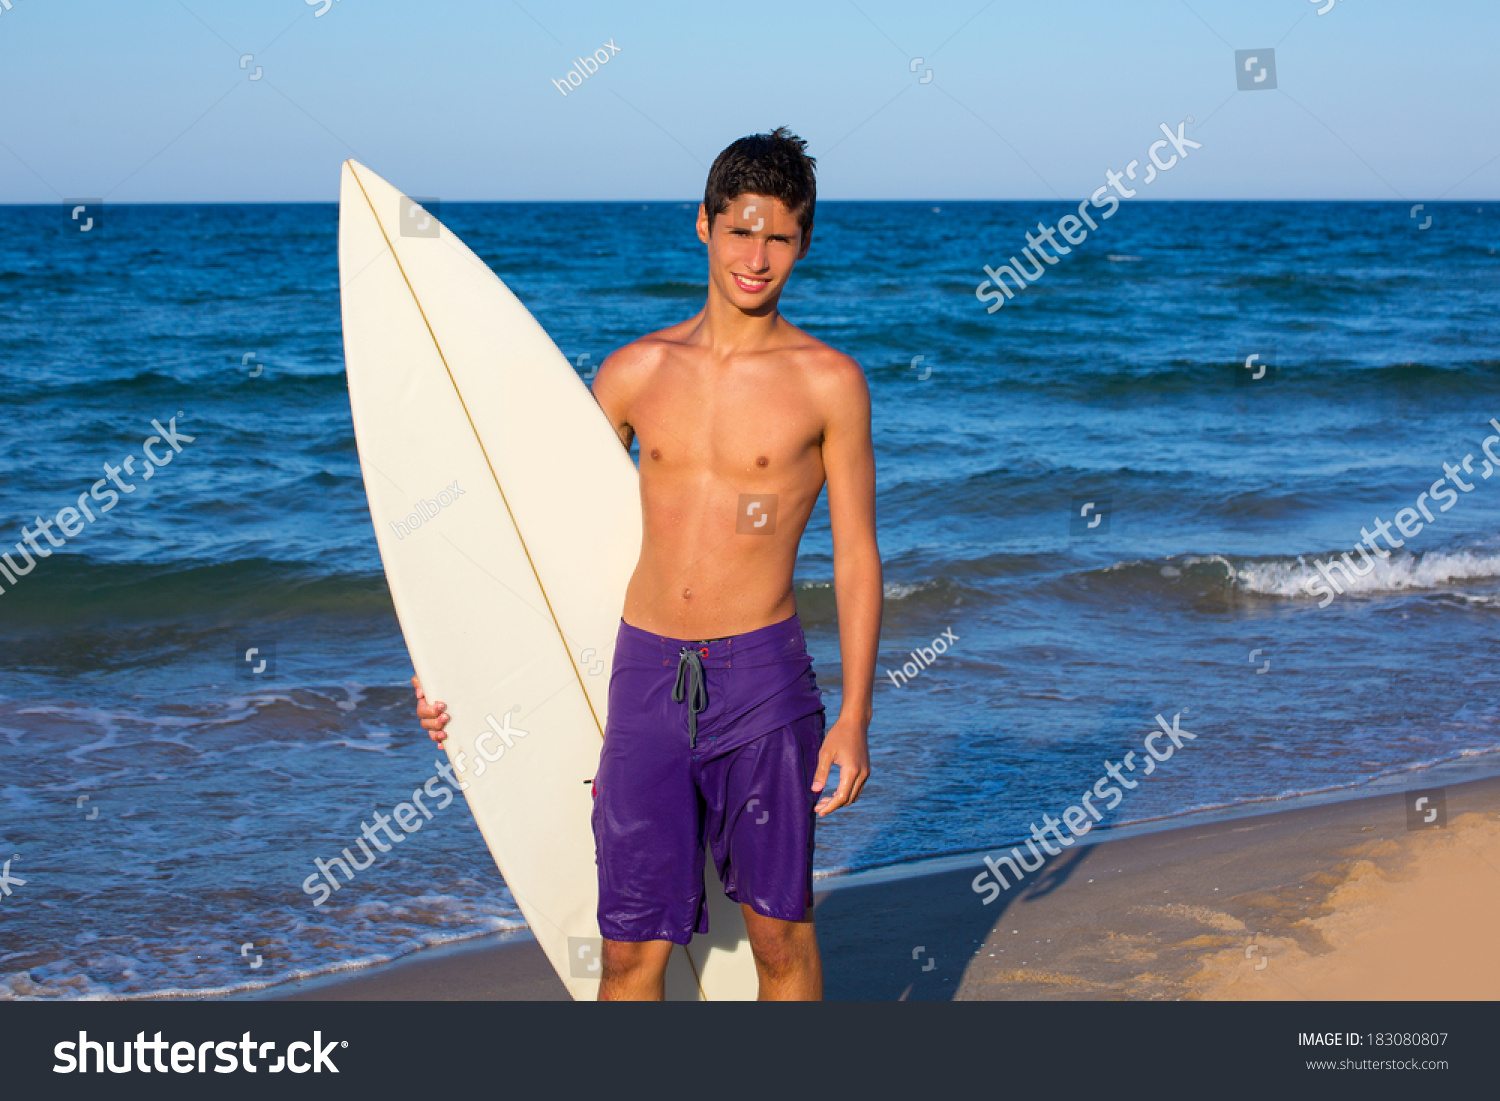 Boy Teen Surfer Happy Holing Surfboard On The Beach Shore Stock Photo ...